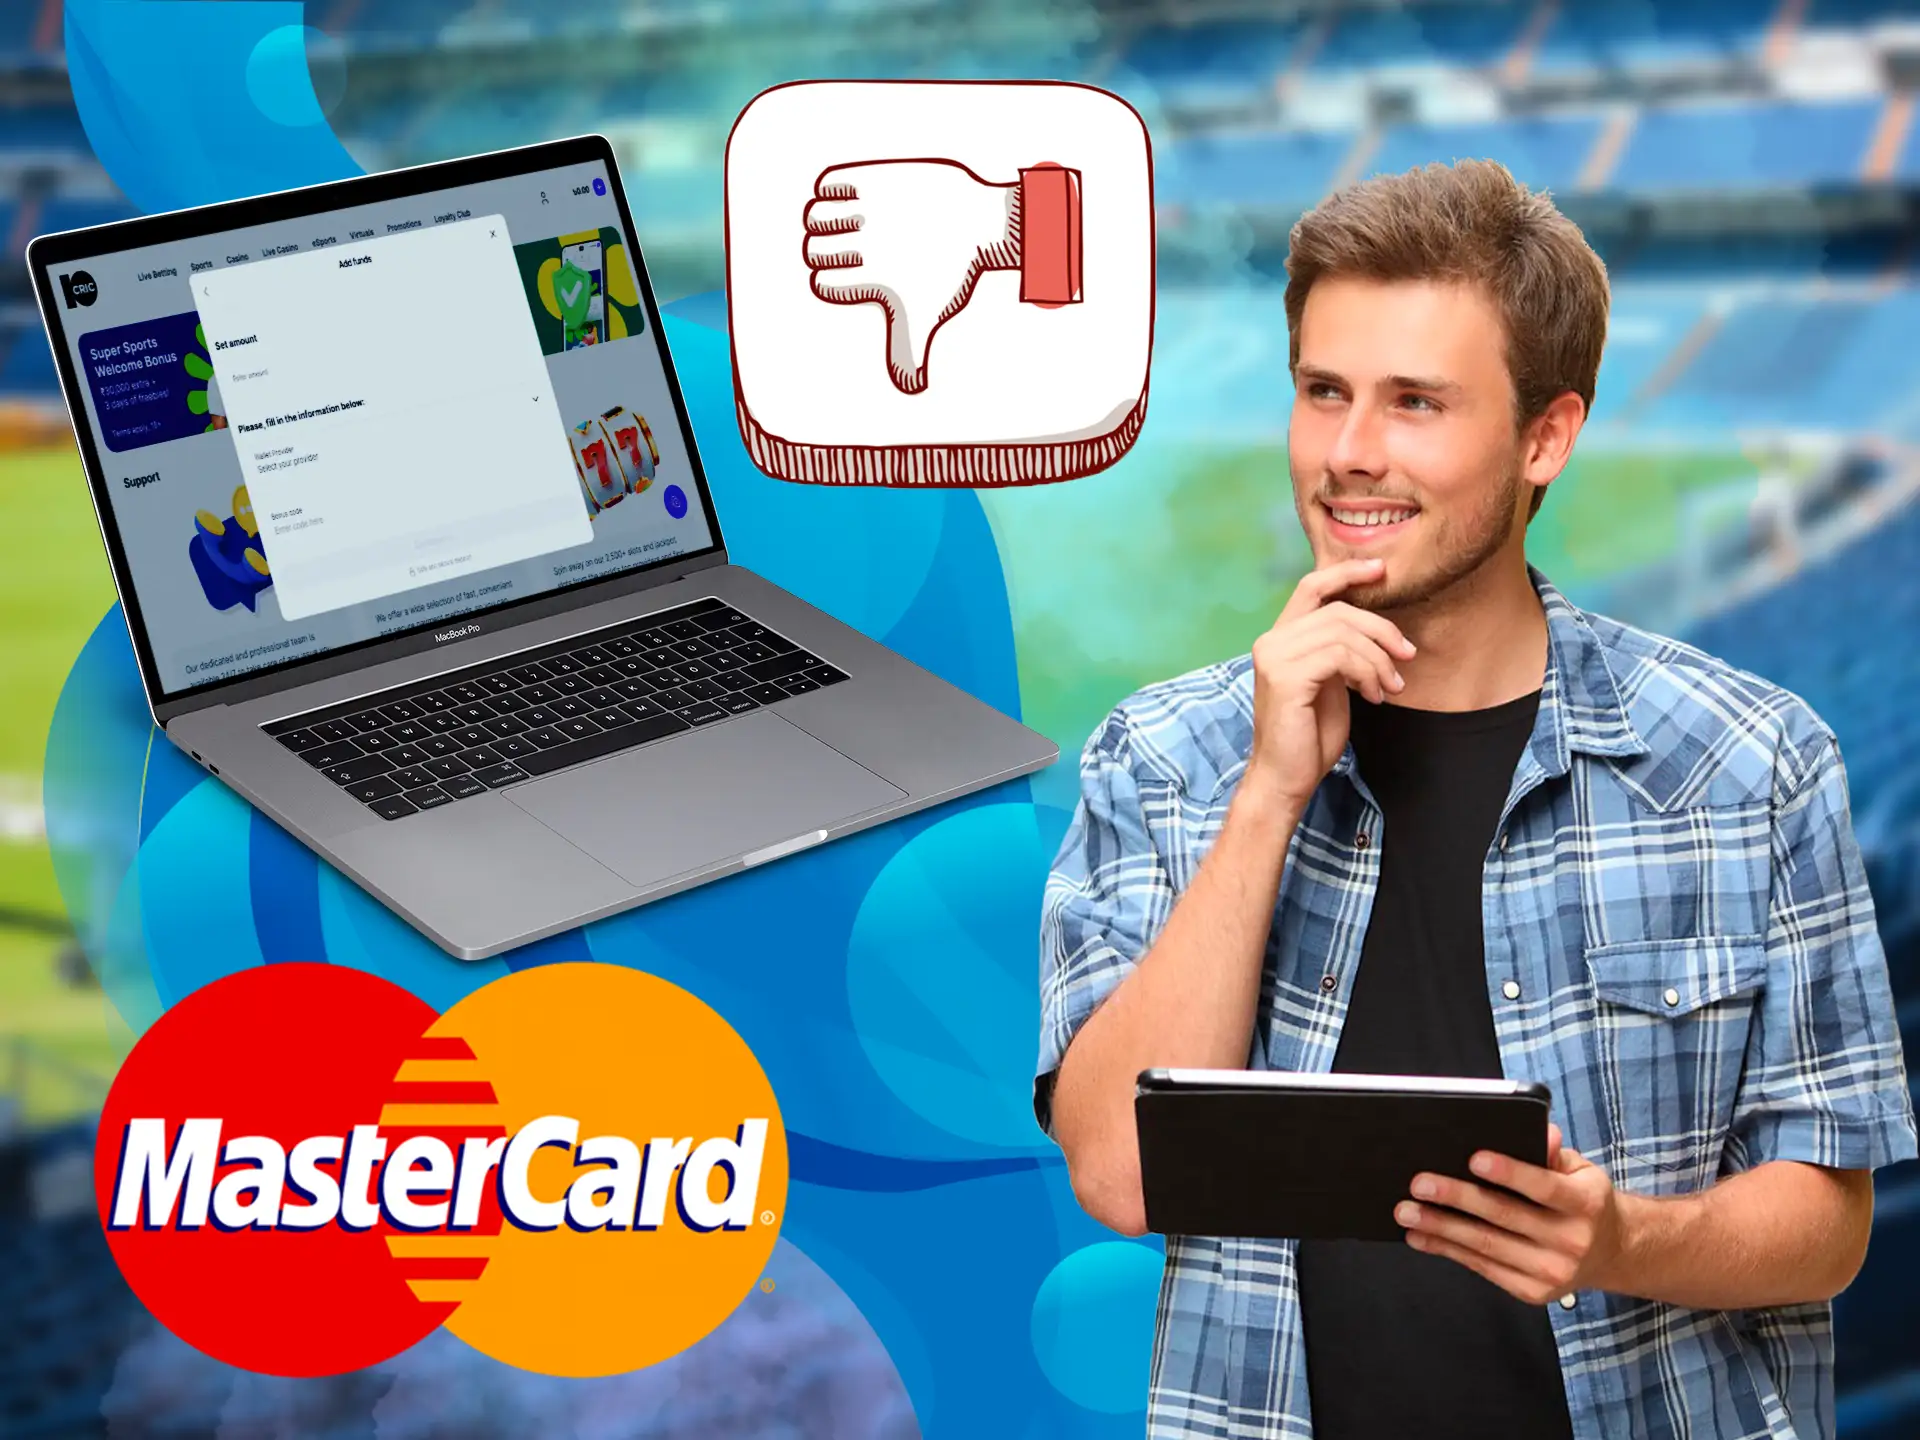 It is important for players to understand the negative sides of the MasterCard system when depositing into a game account.